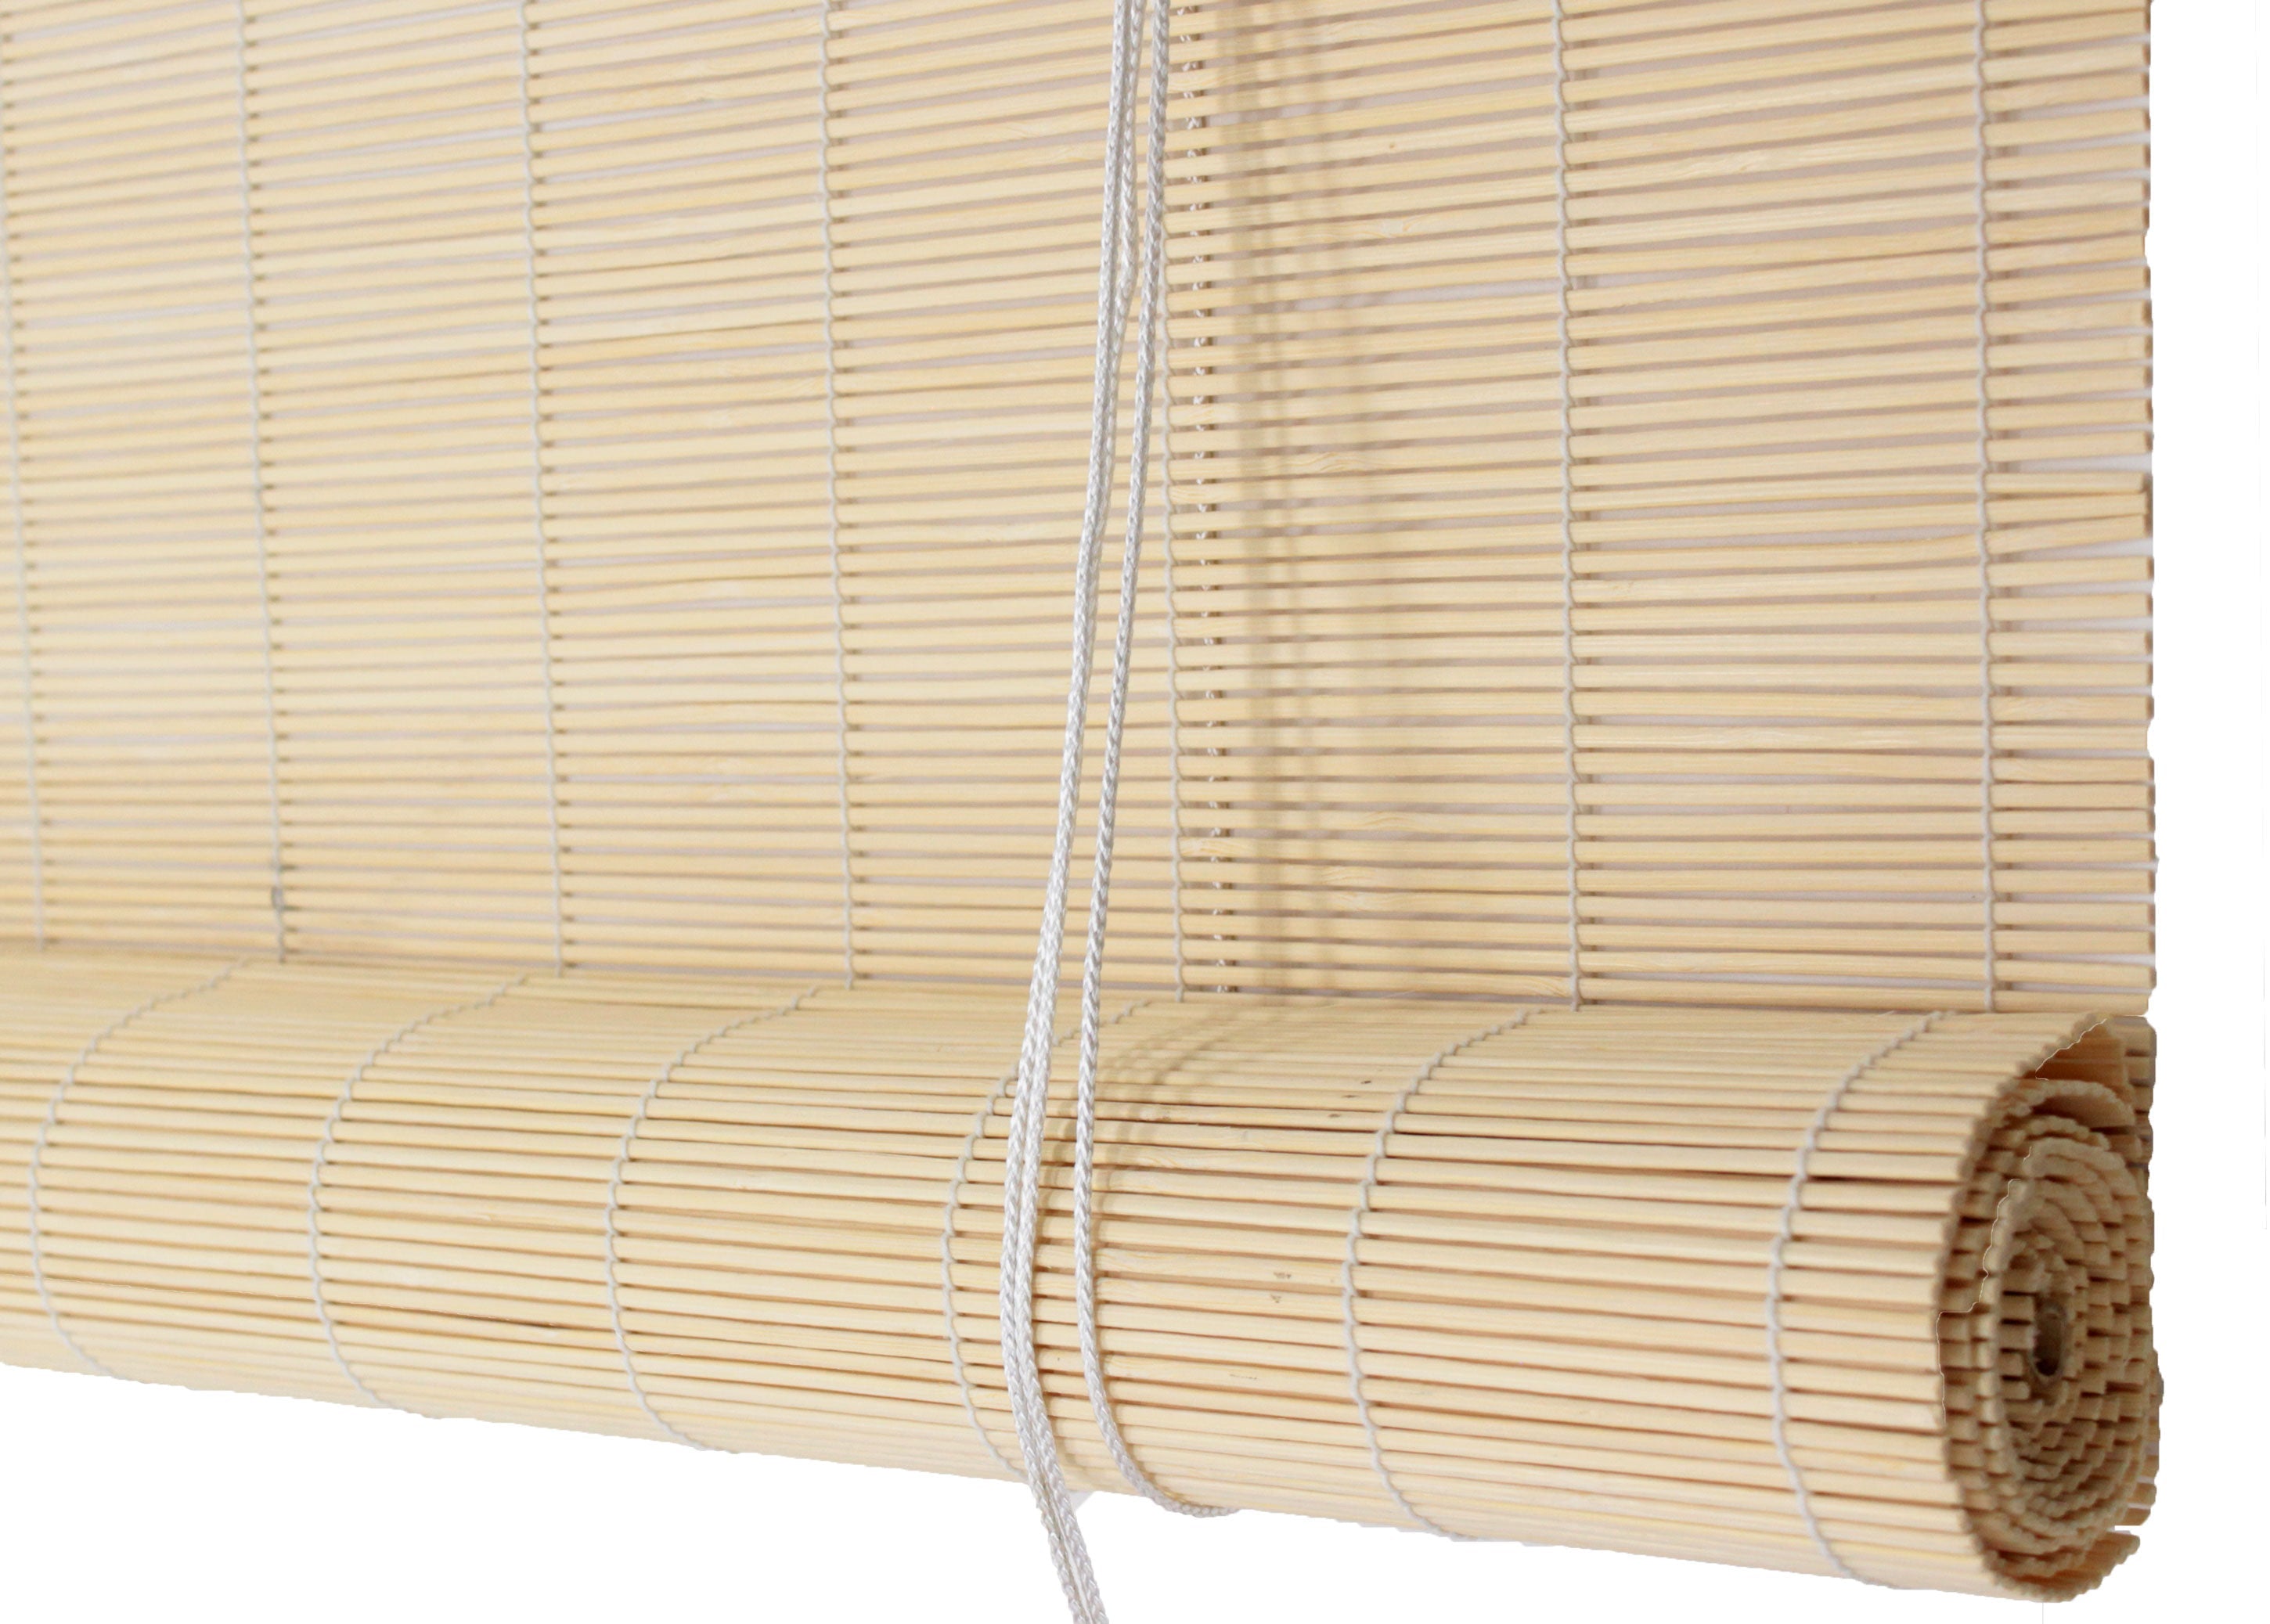 ZH-VBC Bamboo Roll Up Shades for Outdoor Use, Lined Panama